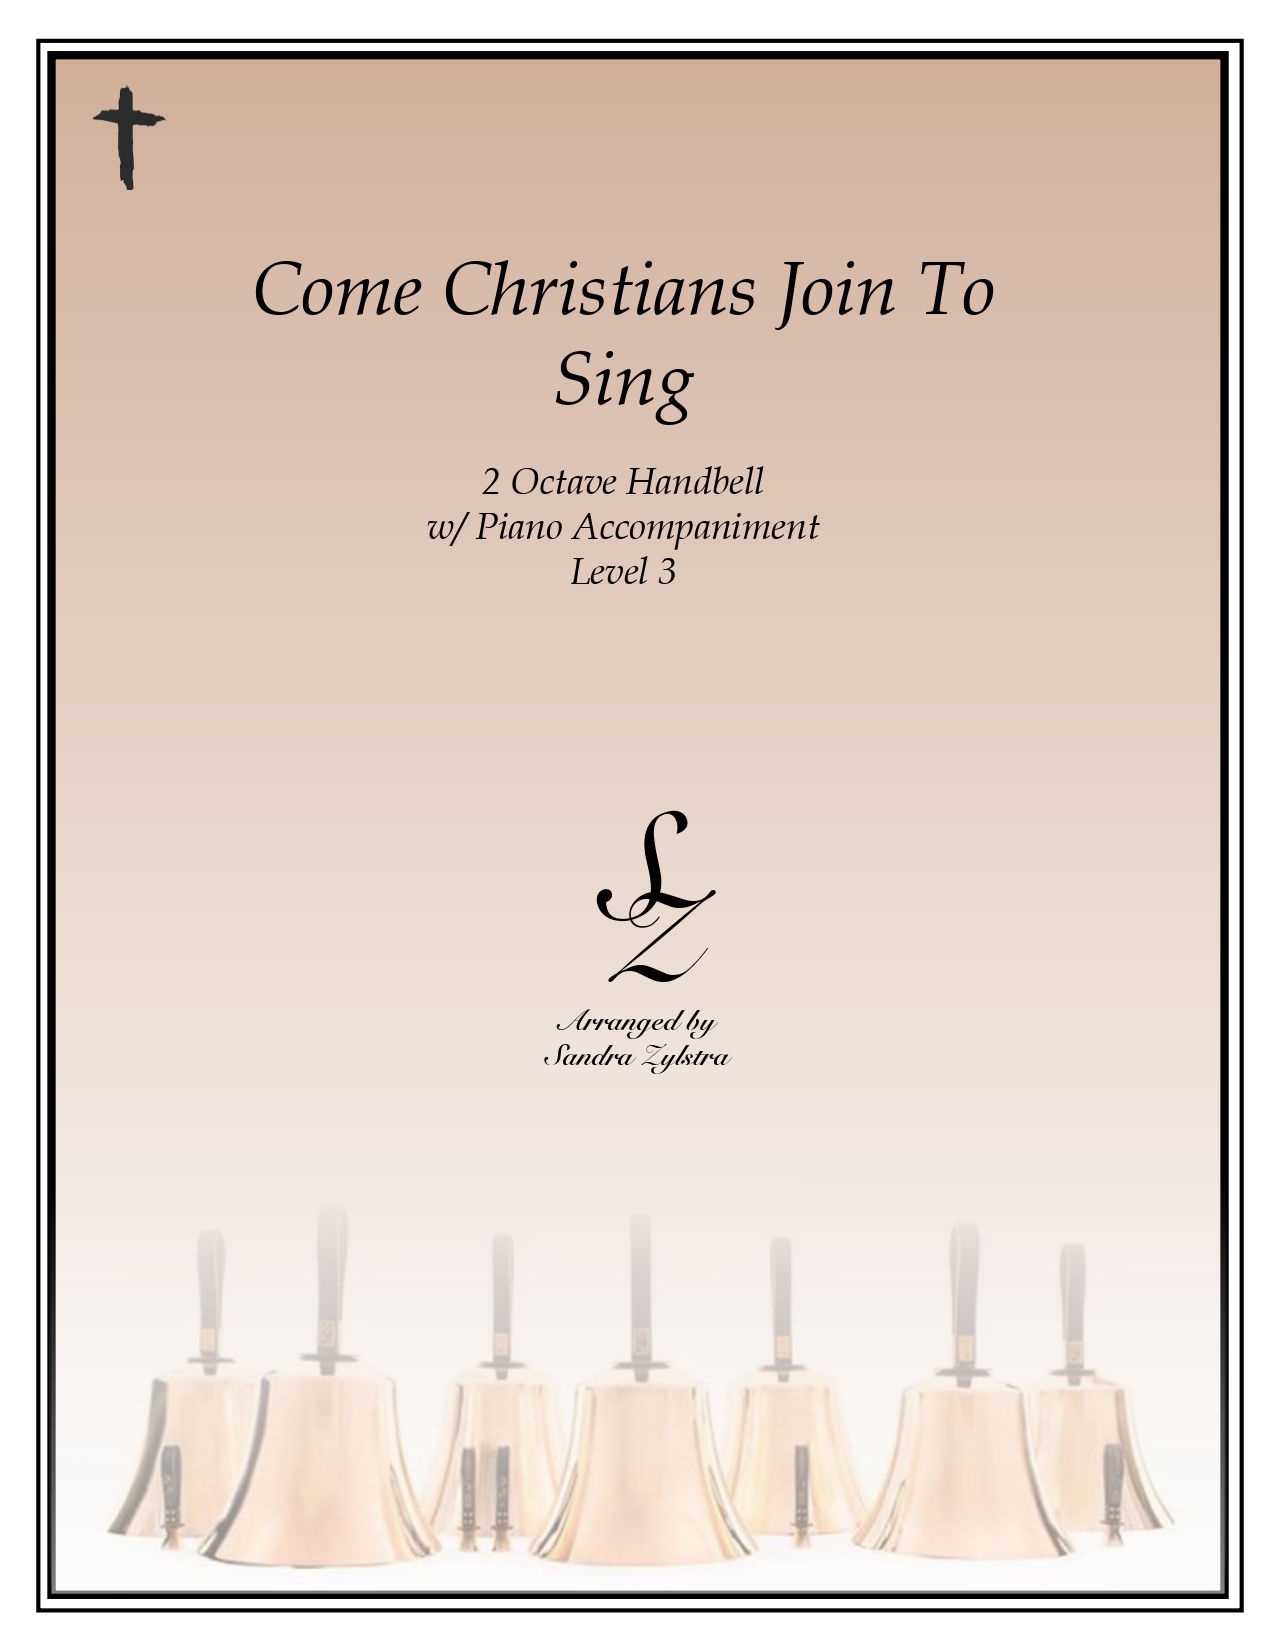 Come Christians Join To Sing 2 octave handbells part cover page 00011